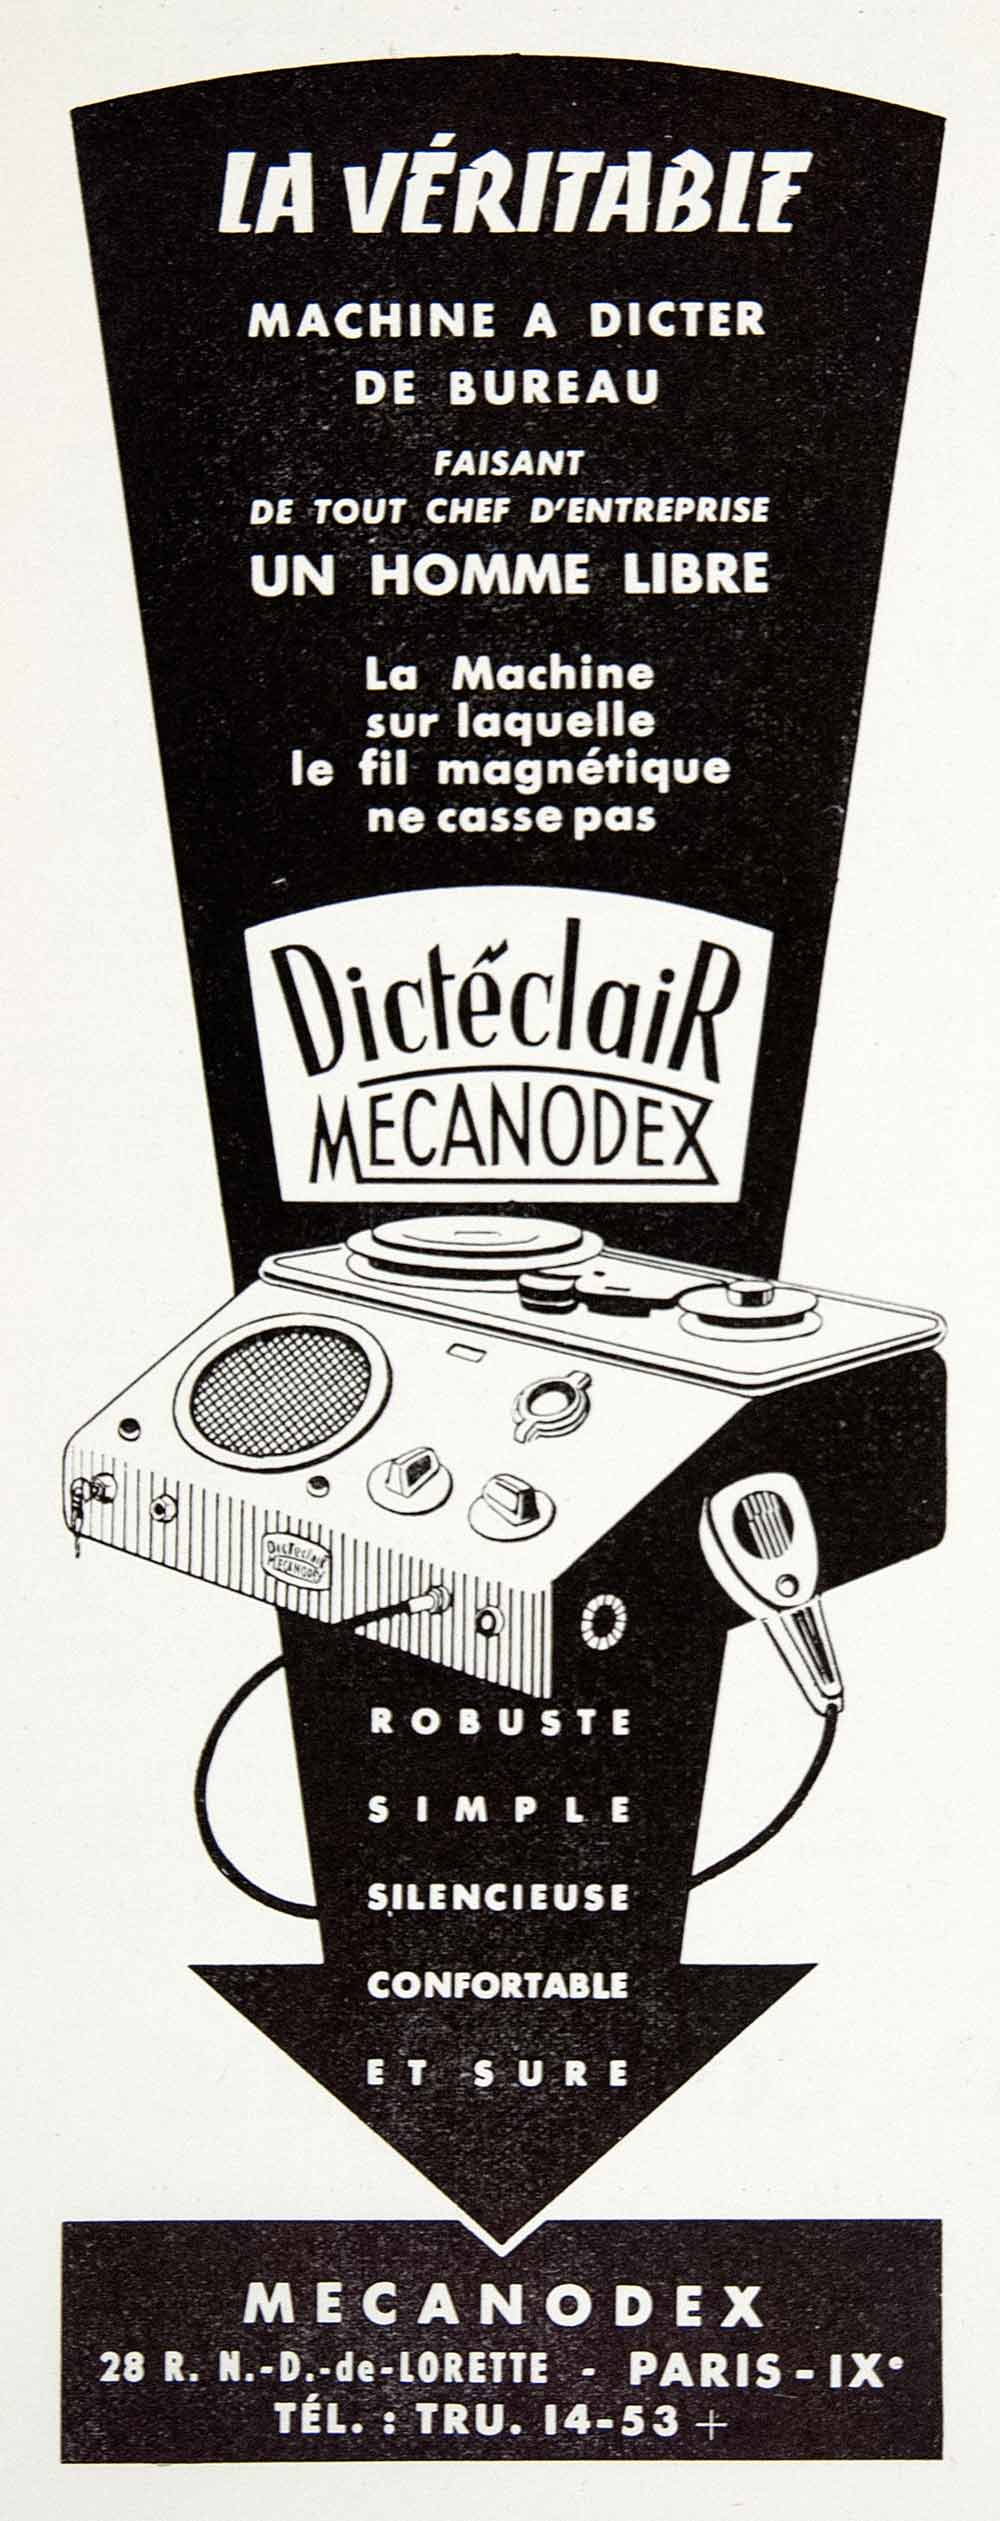 1953 Ad Mecanodex Dicteclair Dictaphone Machine Office French Dictation VEN8